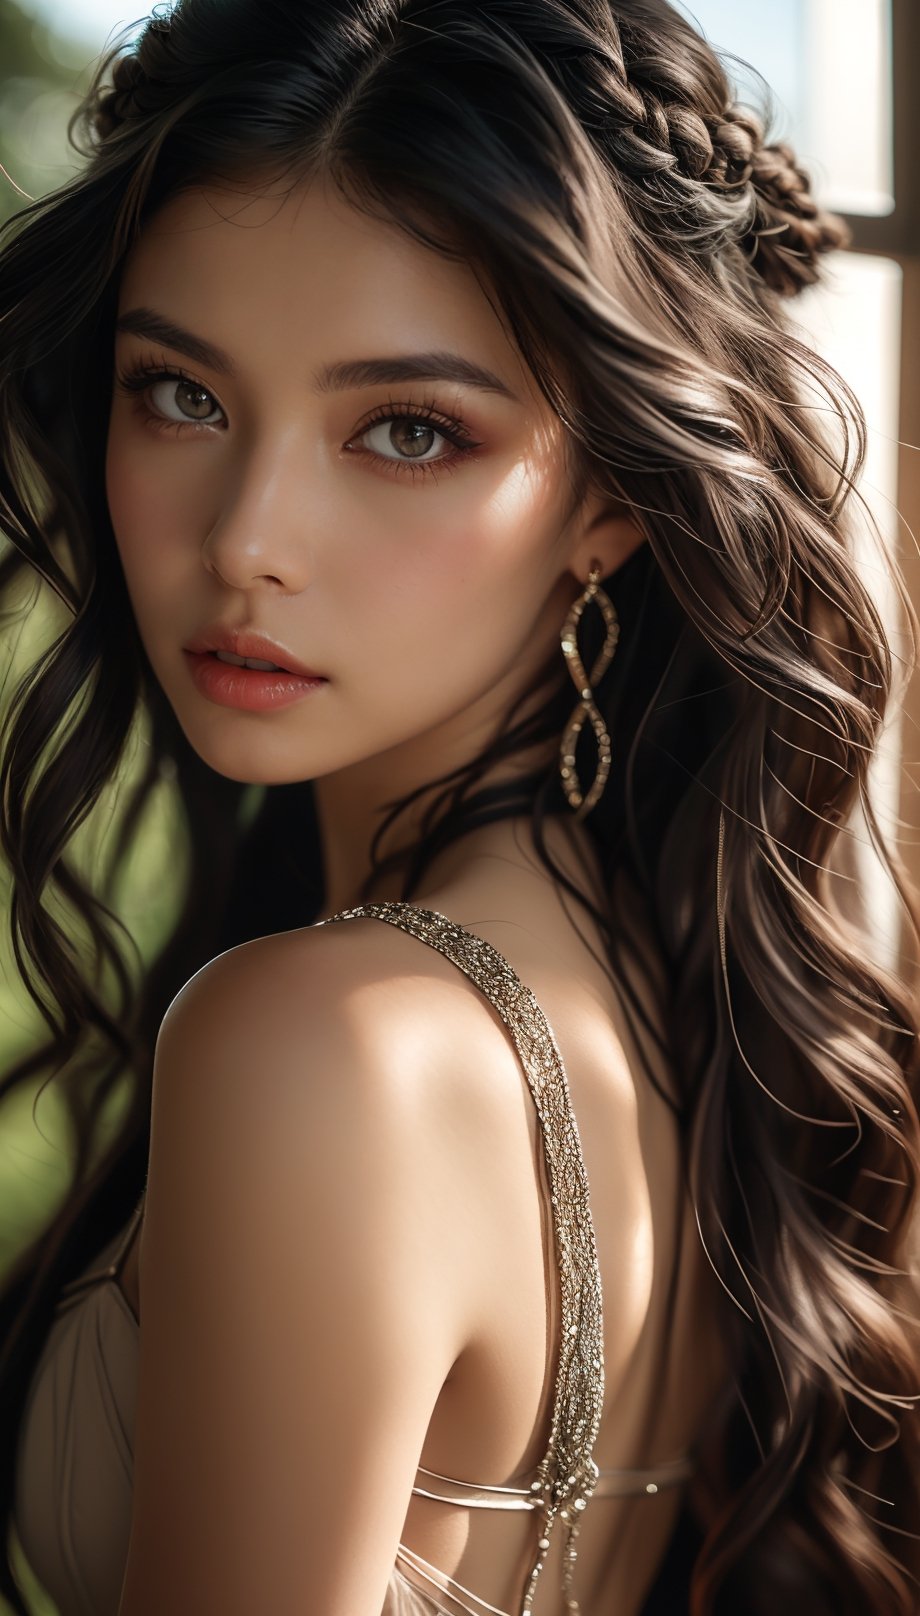 Our cover model exudes confidence in a daring sheer dress with strategic cut-outs that reveal just enough. Her hair cascades in loose waves, and her makeup boasts a sultry smoky eye and a glossy nude lip. Discover the allure of the sheer trend, very cool face, cat eye face